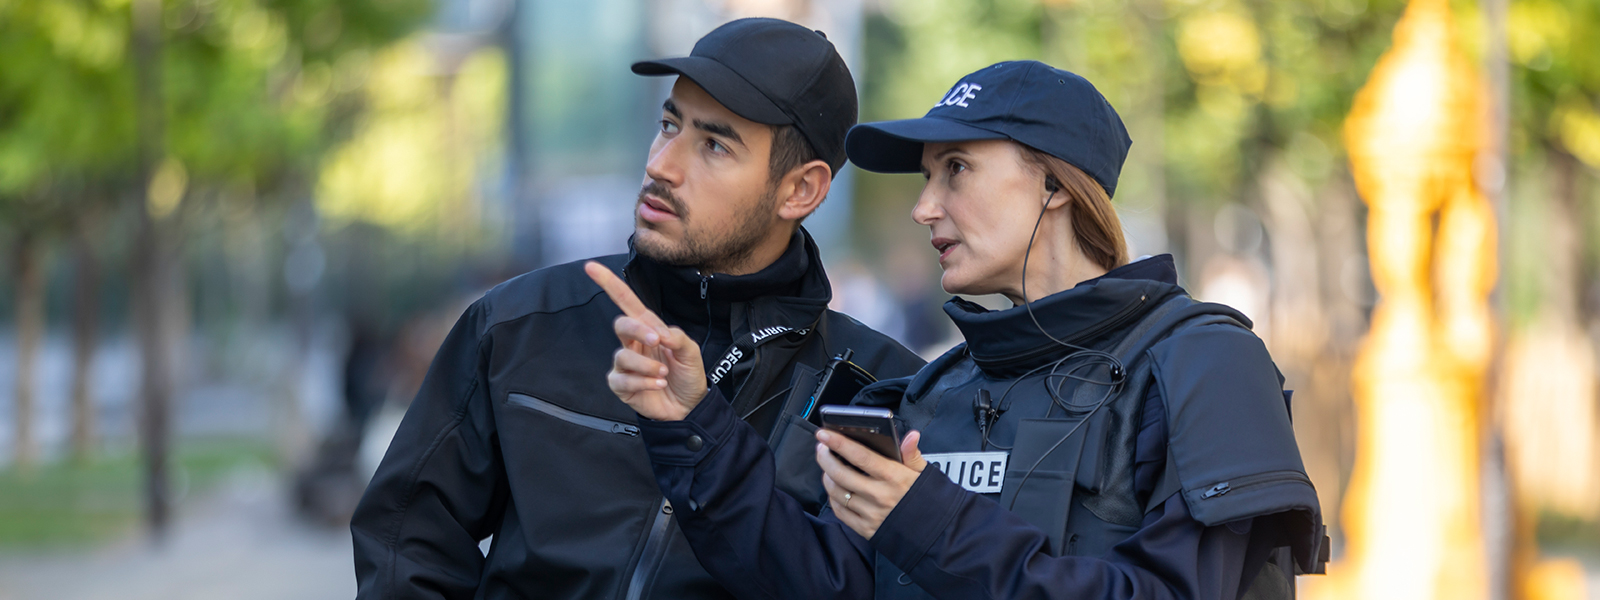 French-police-officers-with-smartphone-hero_1600x600